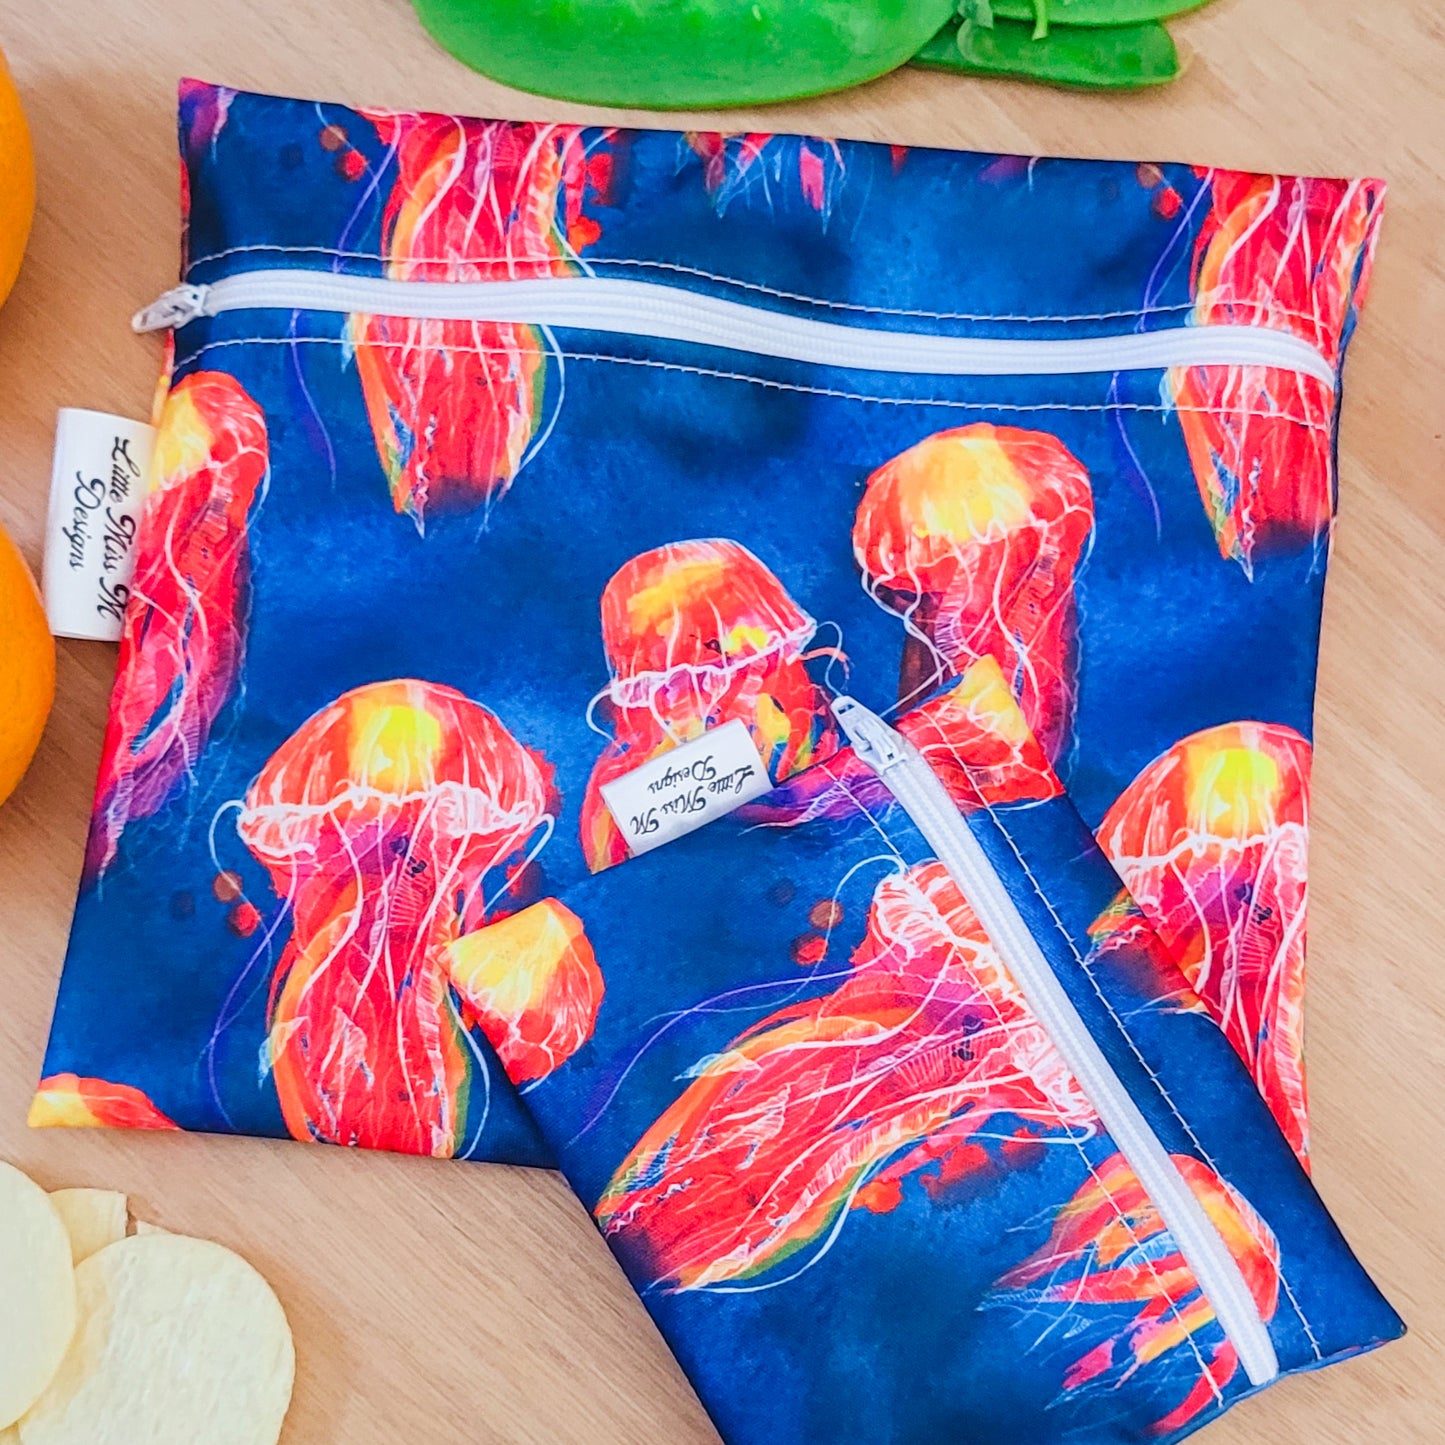 Fiery Jellyfish Limited Edition Snack Bag